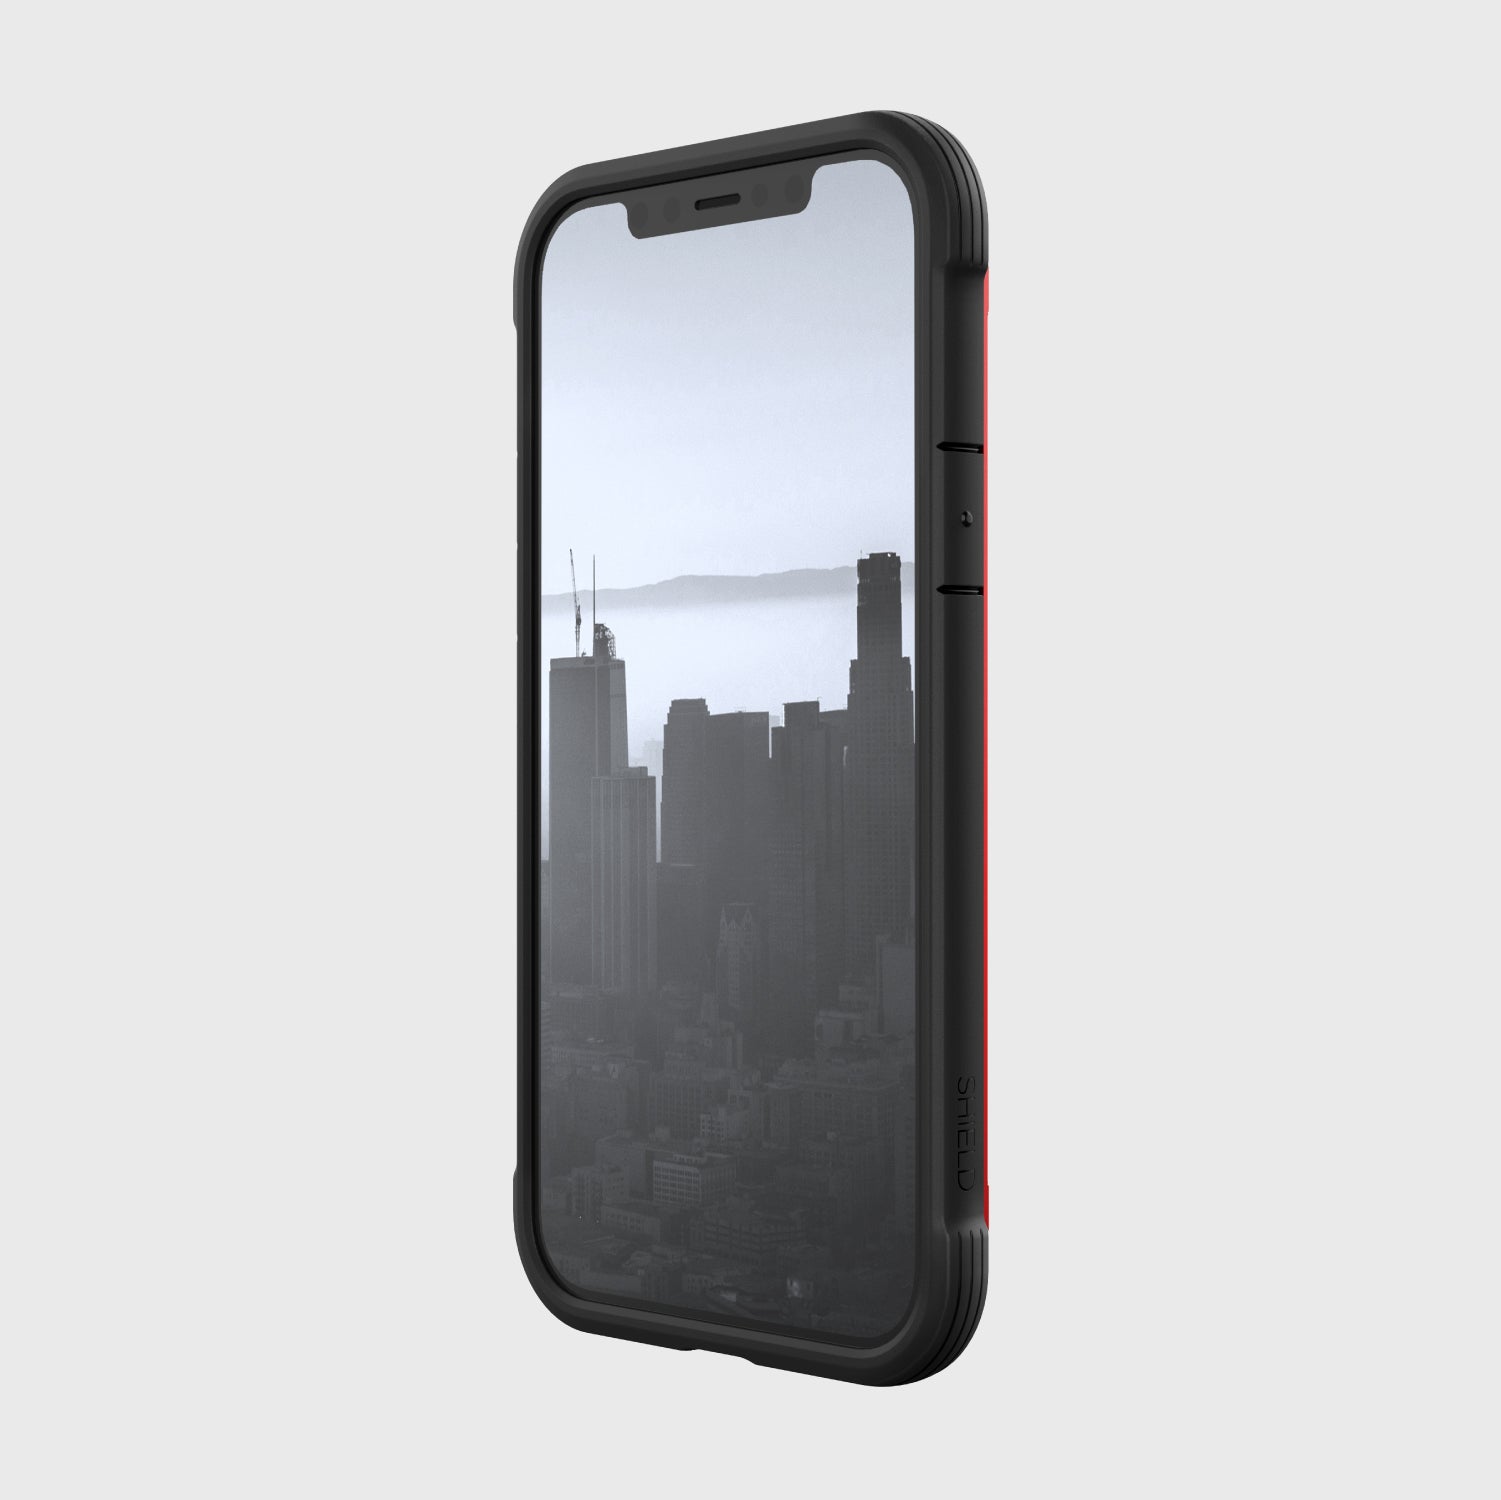 A black and red Raptic iPhone 12 & iPhone 12 Pro Case - SHIELD providing protection for the iPhone 12 Pro.